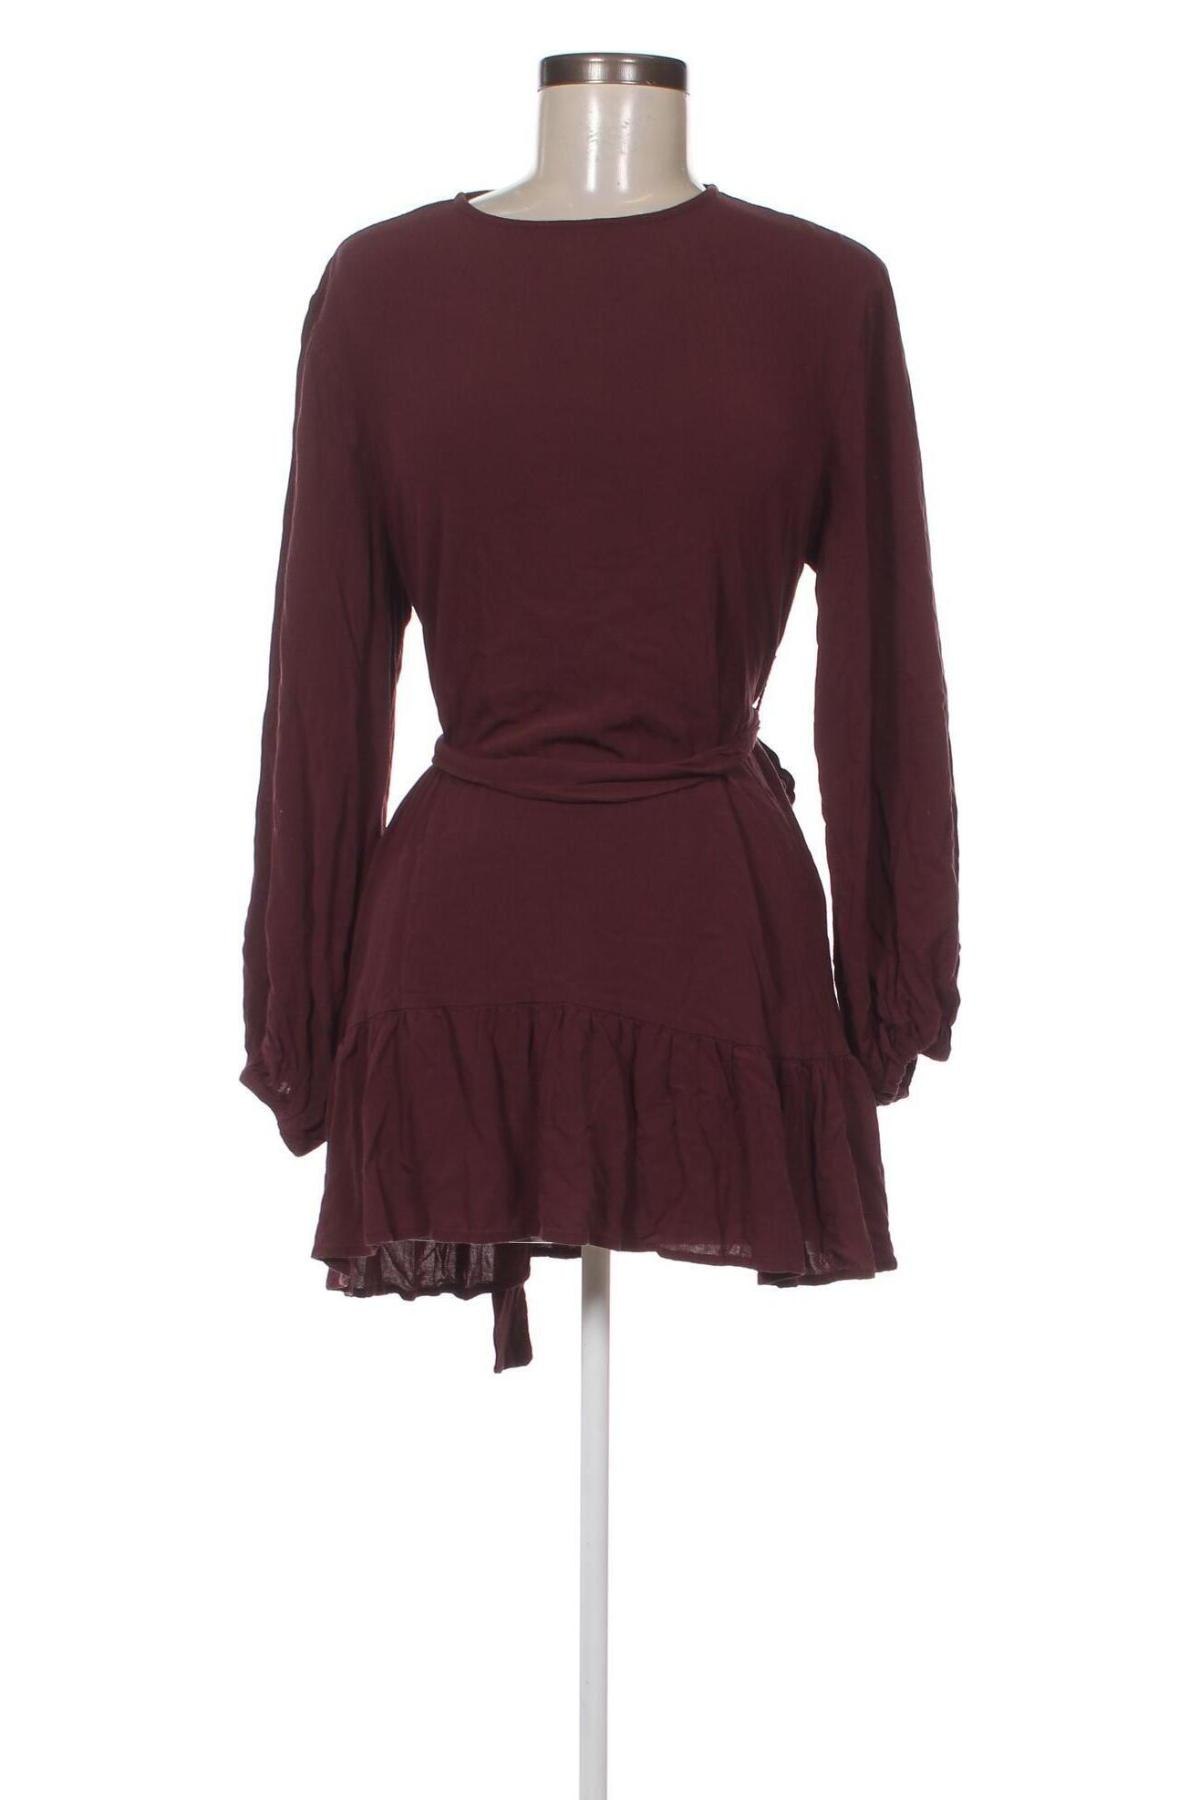 Kleid Guido Maria Kretschmer for About You, Größe S, Farbe Rot, Preis € 52,58